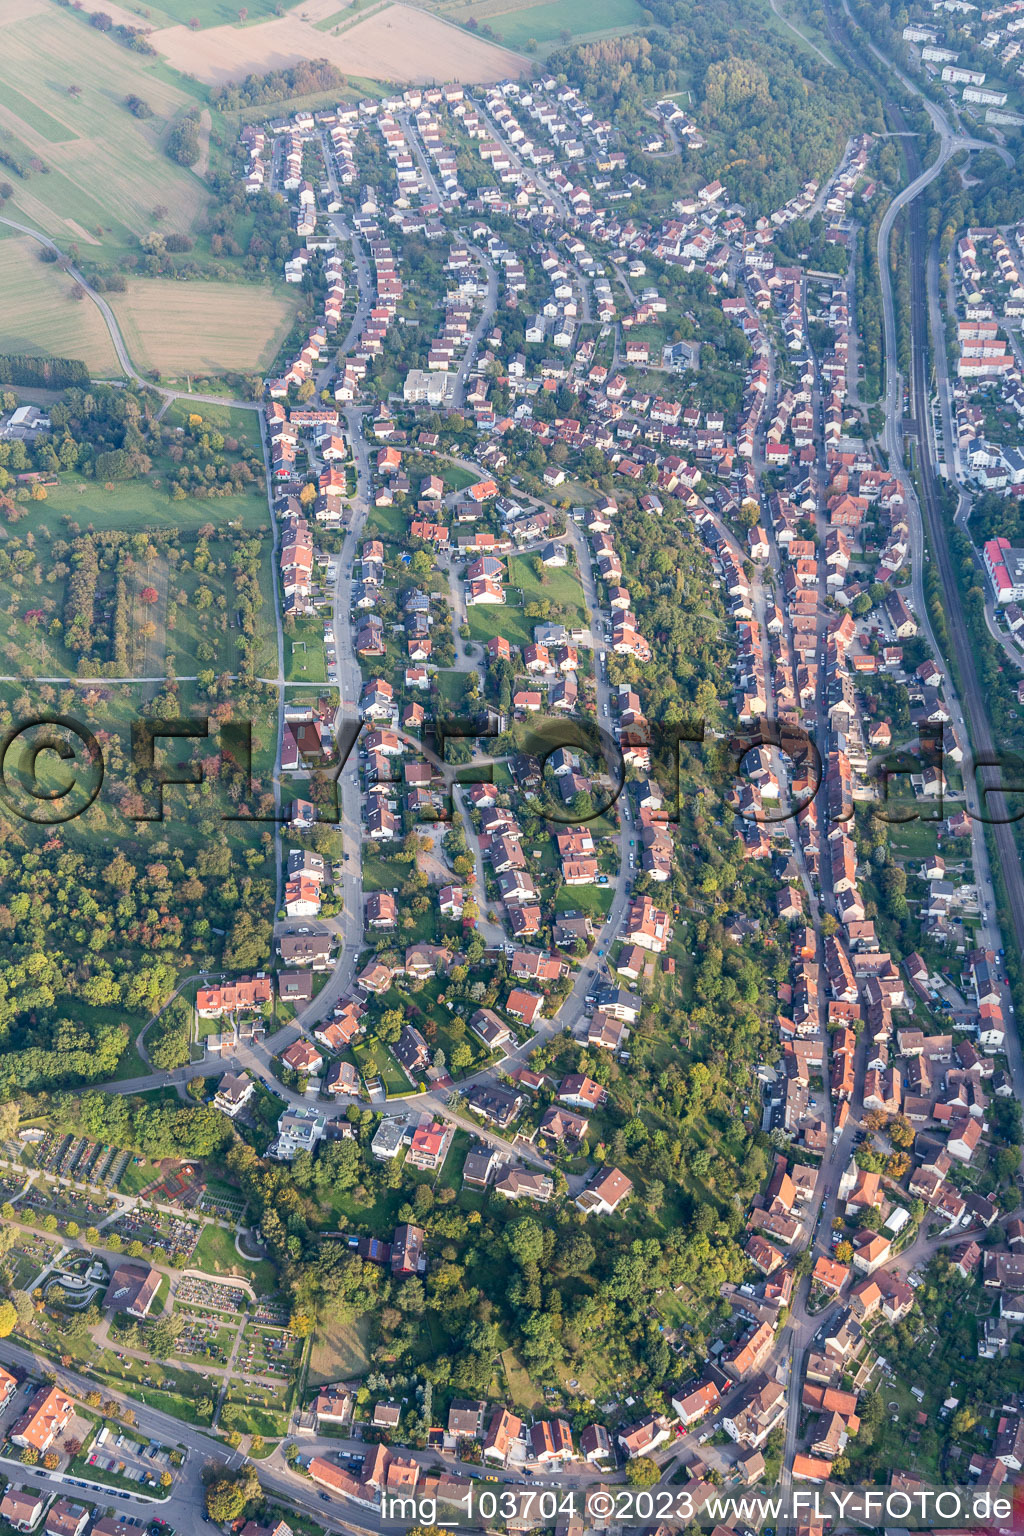 Ispringen in the state Baden-Wuerttemberg, Germany seen from a drone